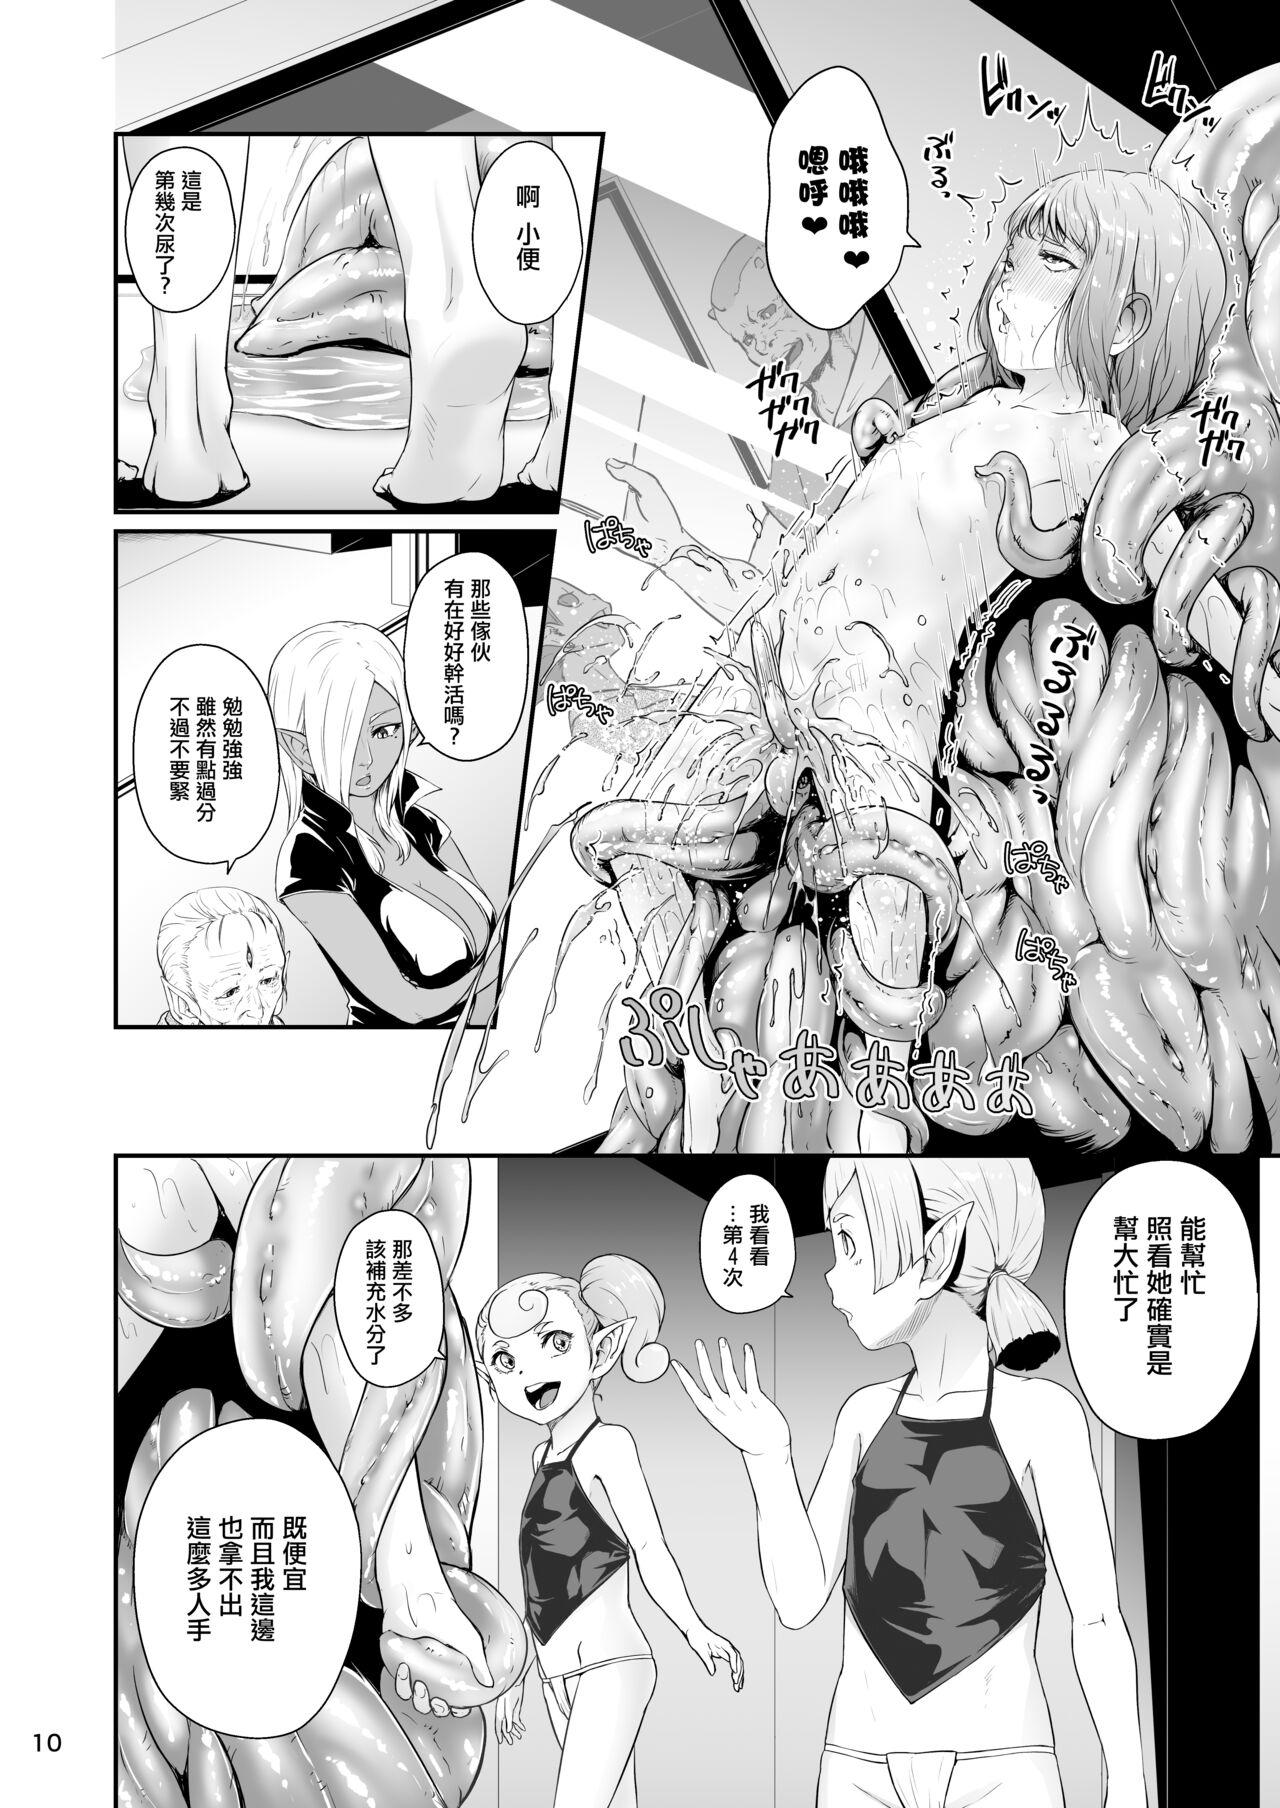 Free Rough Sex Tentacle Tamer! Episode 6 | 觸手訓練師! Episode 6 - Original Dirty - Page 11